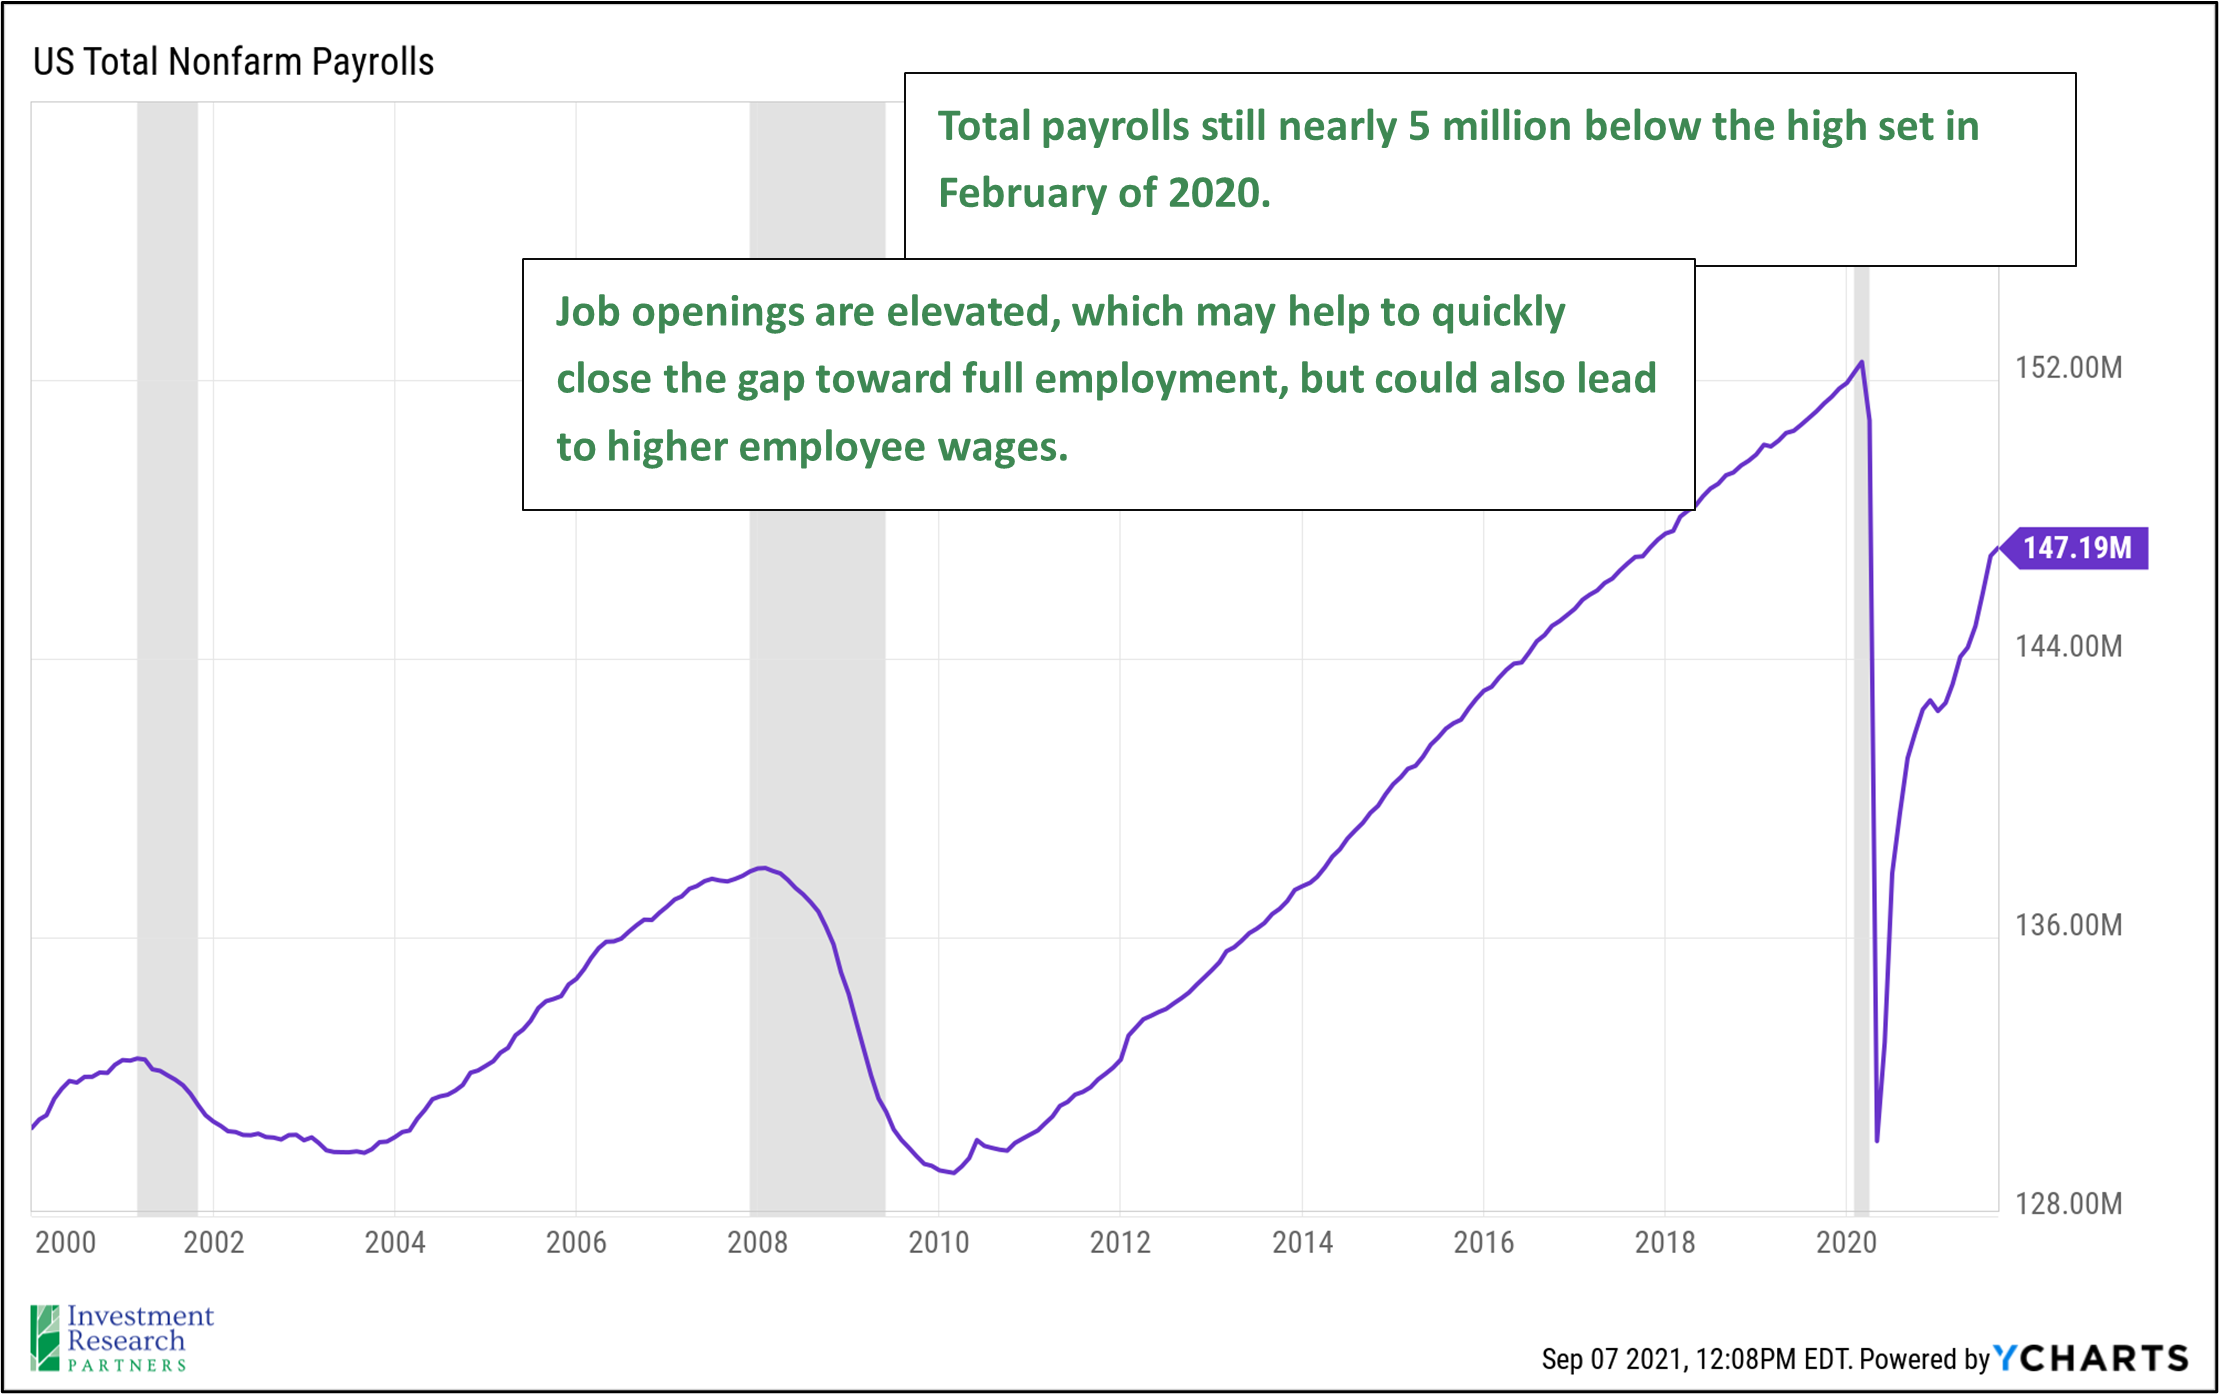 Chart depicting US Total Nonfarm Payrolls from 2000 to 2021 with text: Total payrolls still nearly 5 million below the high set in February of 2020. Job openings are elevated, which may help to quickly close the gap toward full employment, but could also lead to higher employee wages.